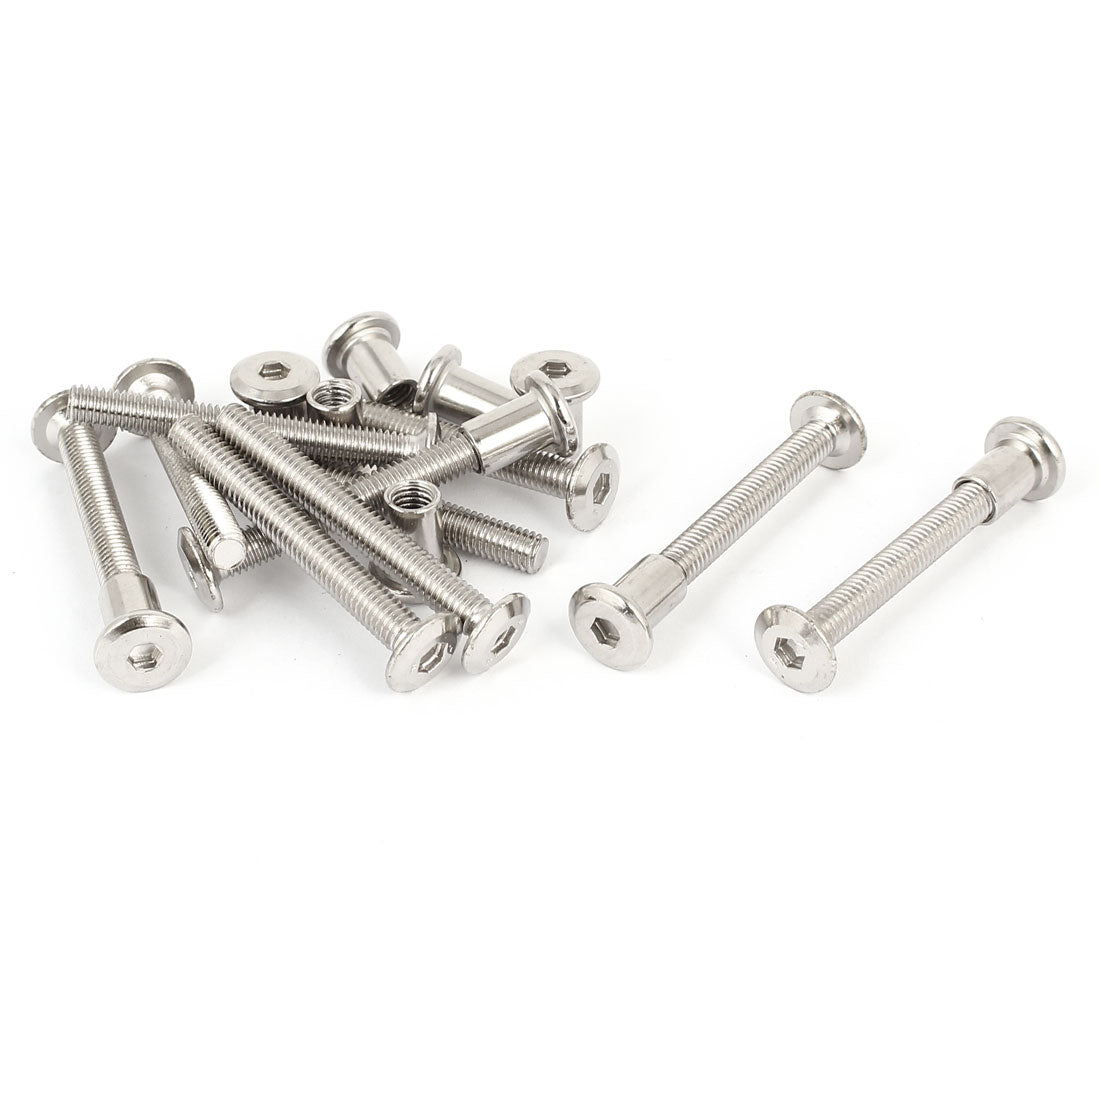 uxcell Uxcell M6 x 50mm Hex Socket Head Nut Countersunk Screw Bolt Fasteners 10 Sets